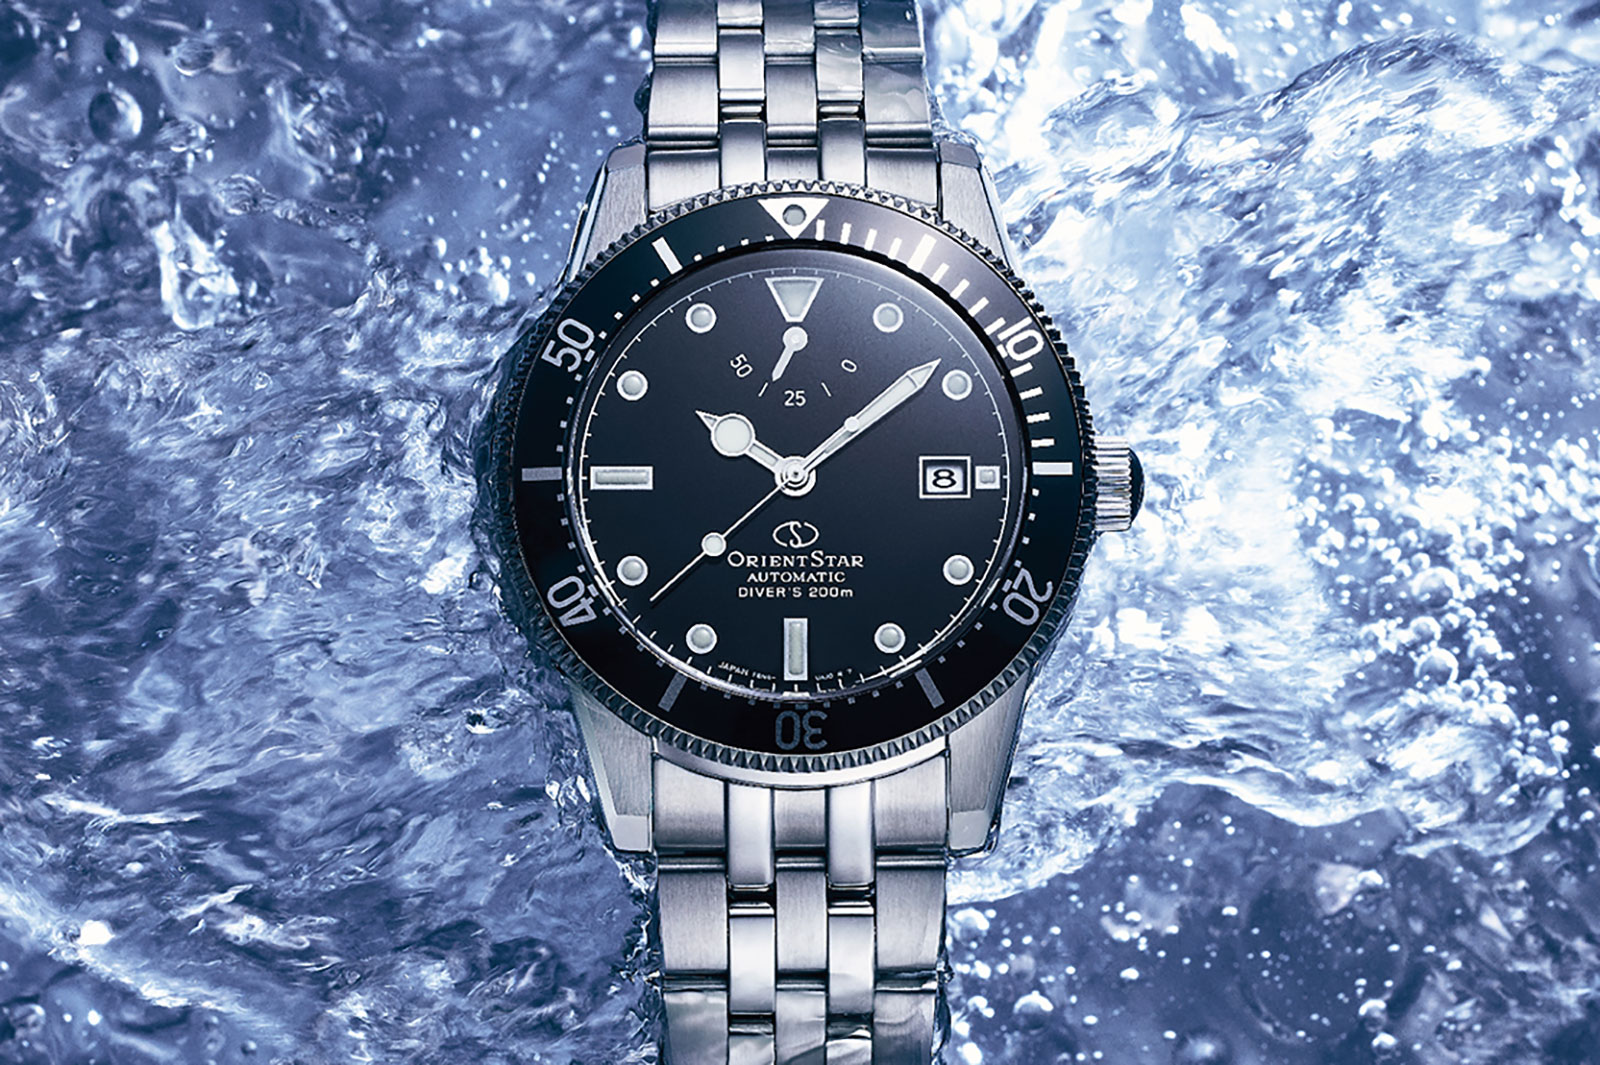 Introducing The Orient Star Diver 1964 2nd Edition Watches